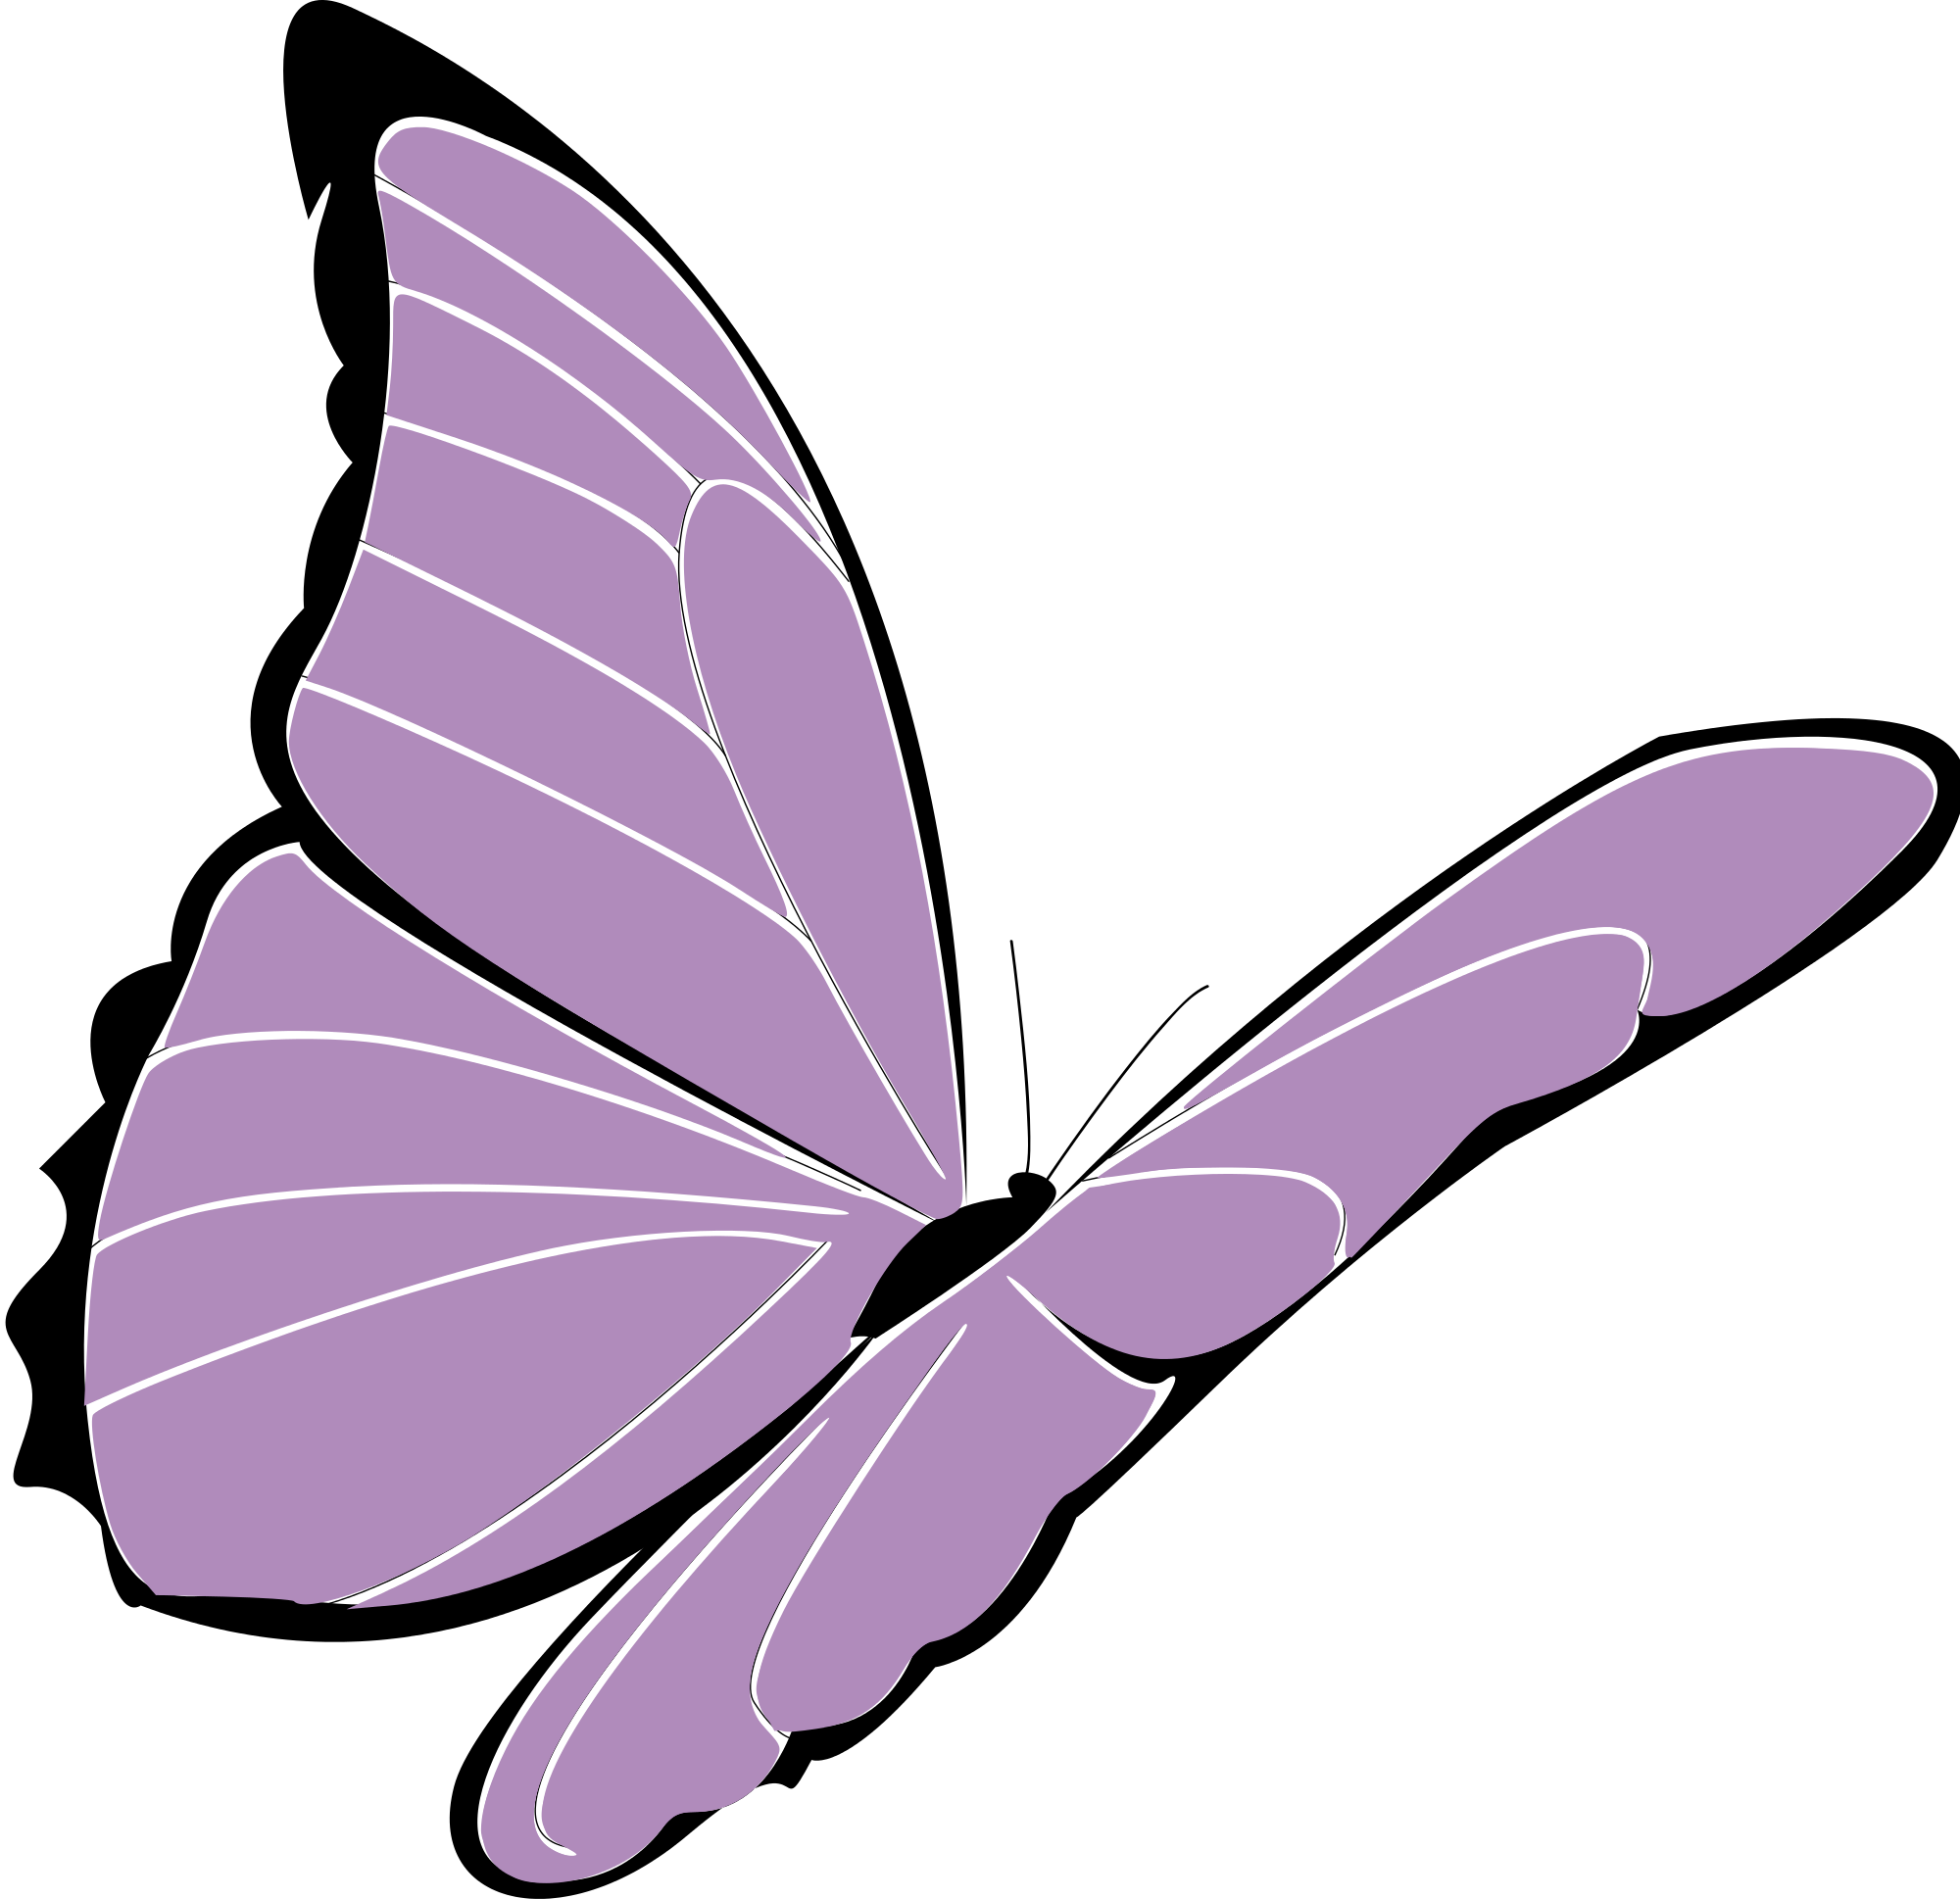 Papillon svg #18, Download drawings